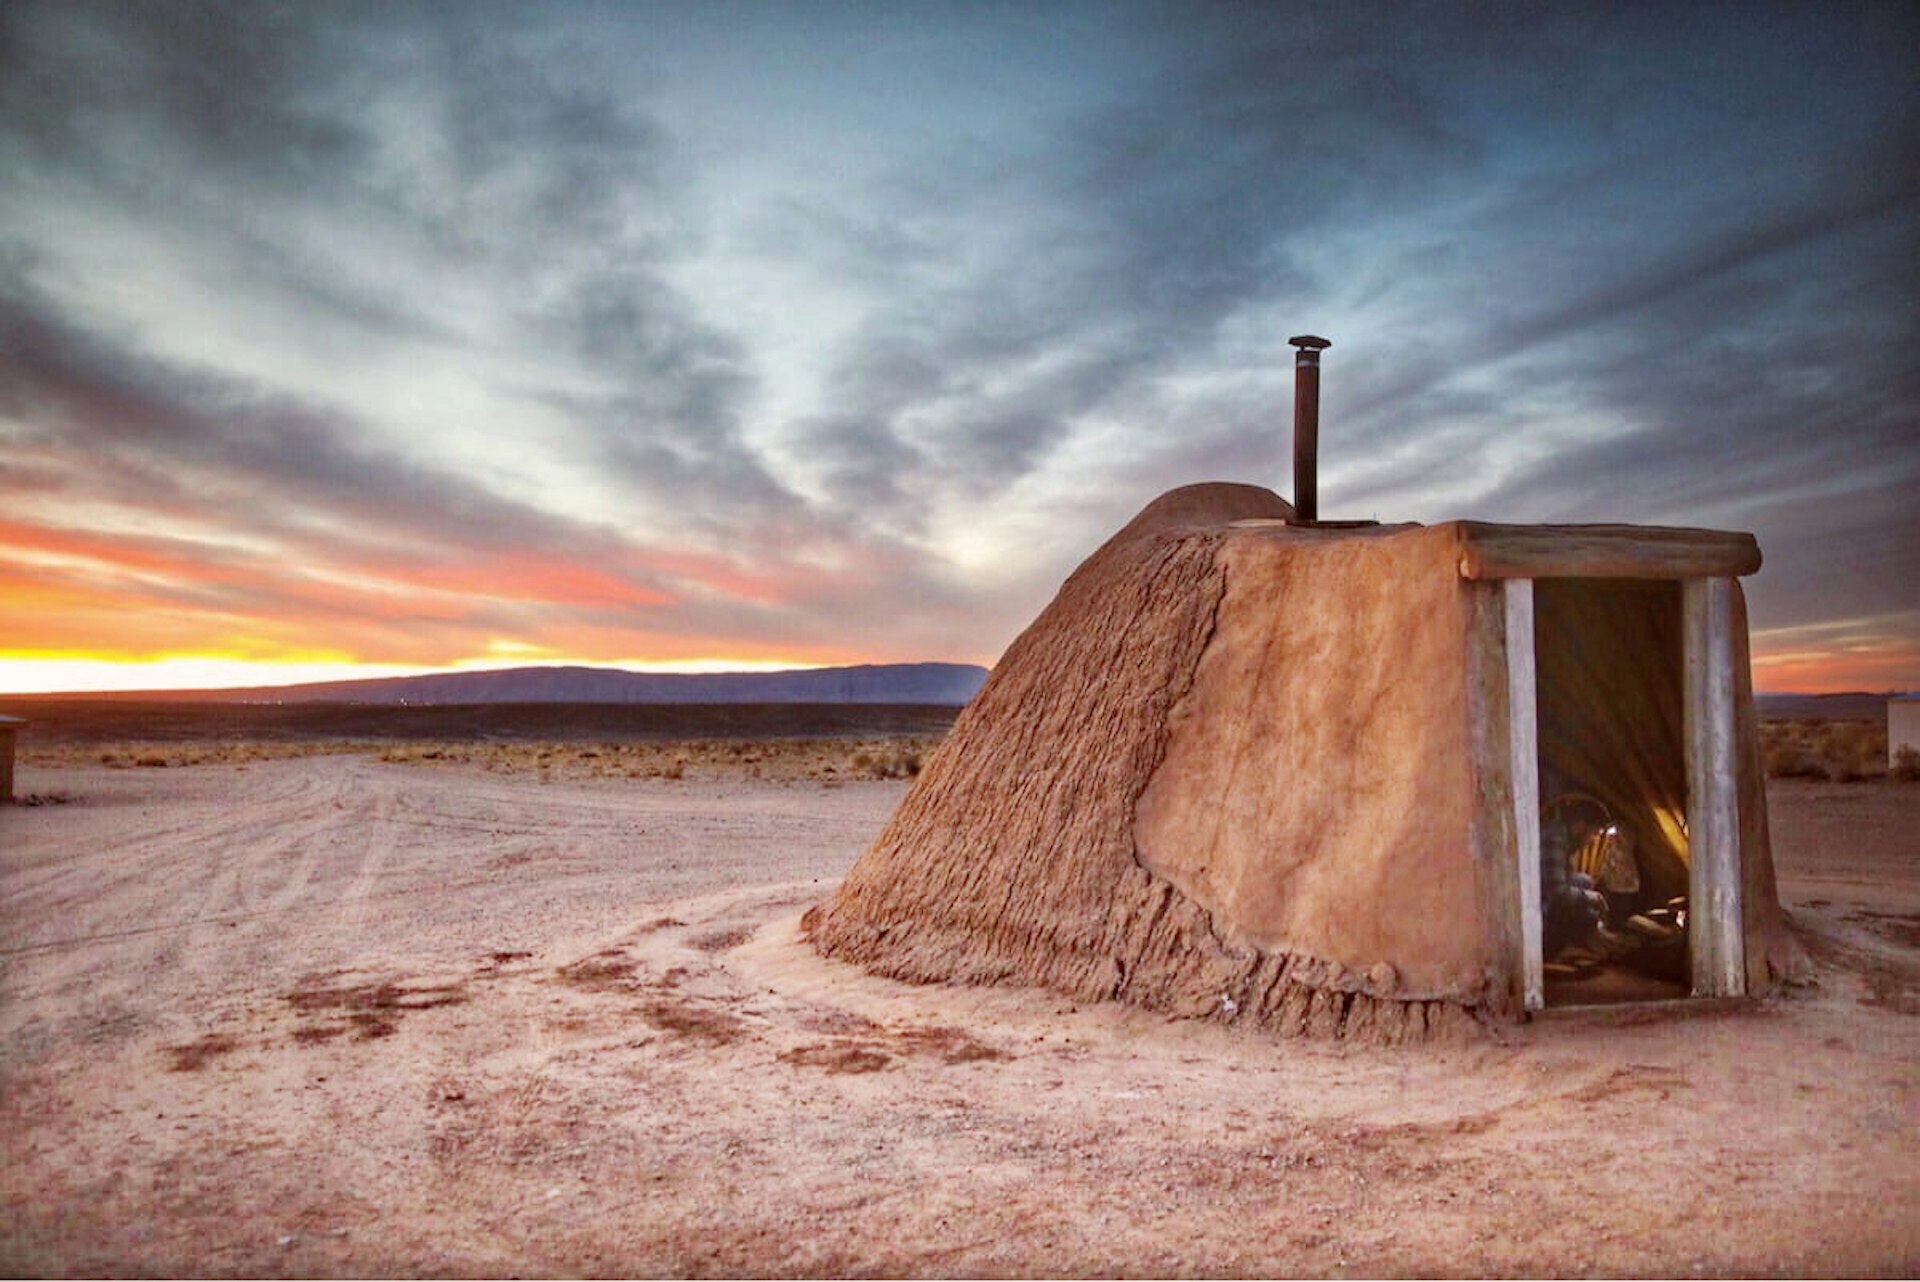 A home made of earth in a desert